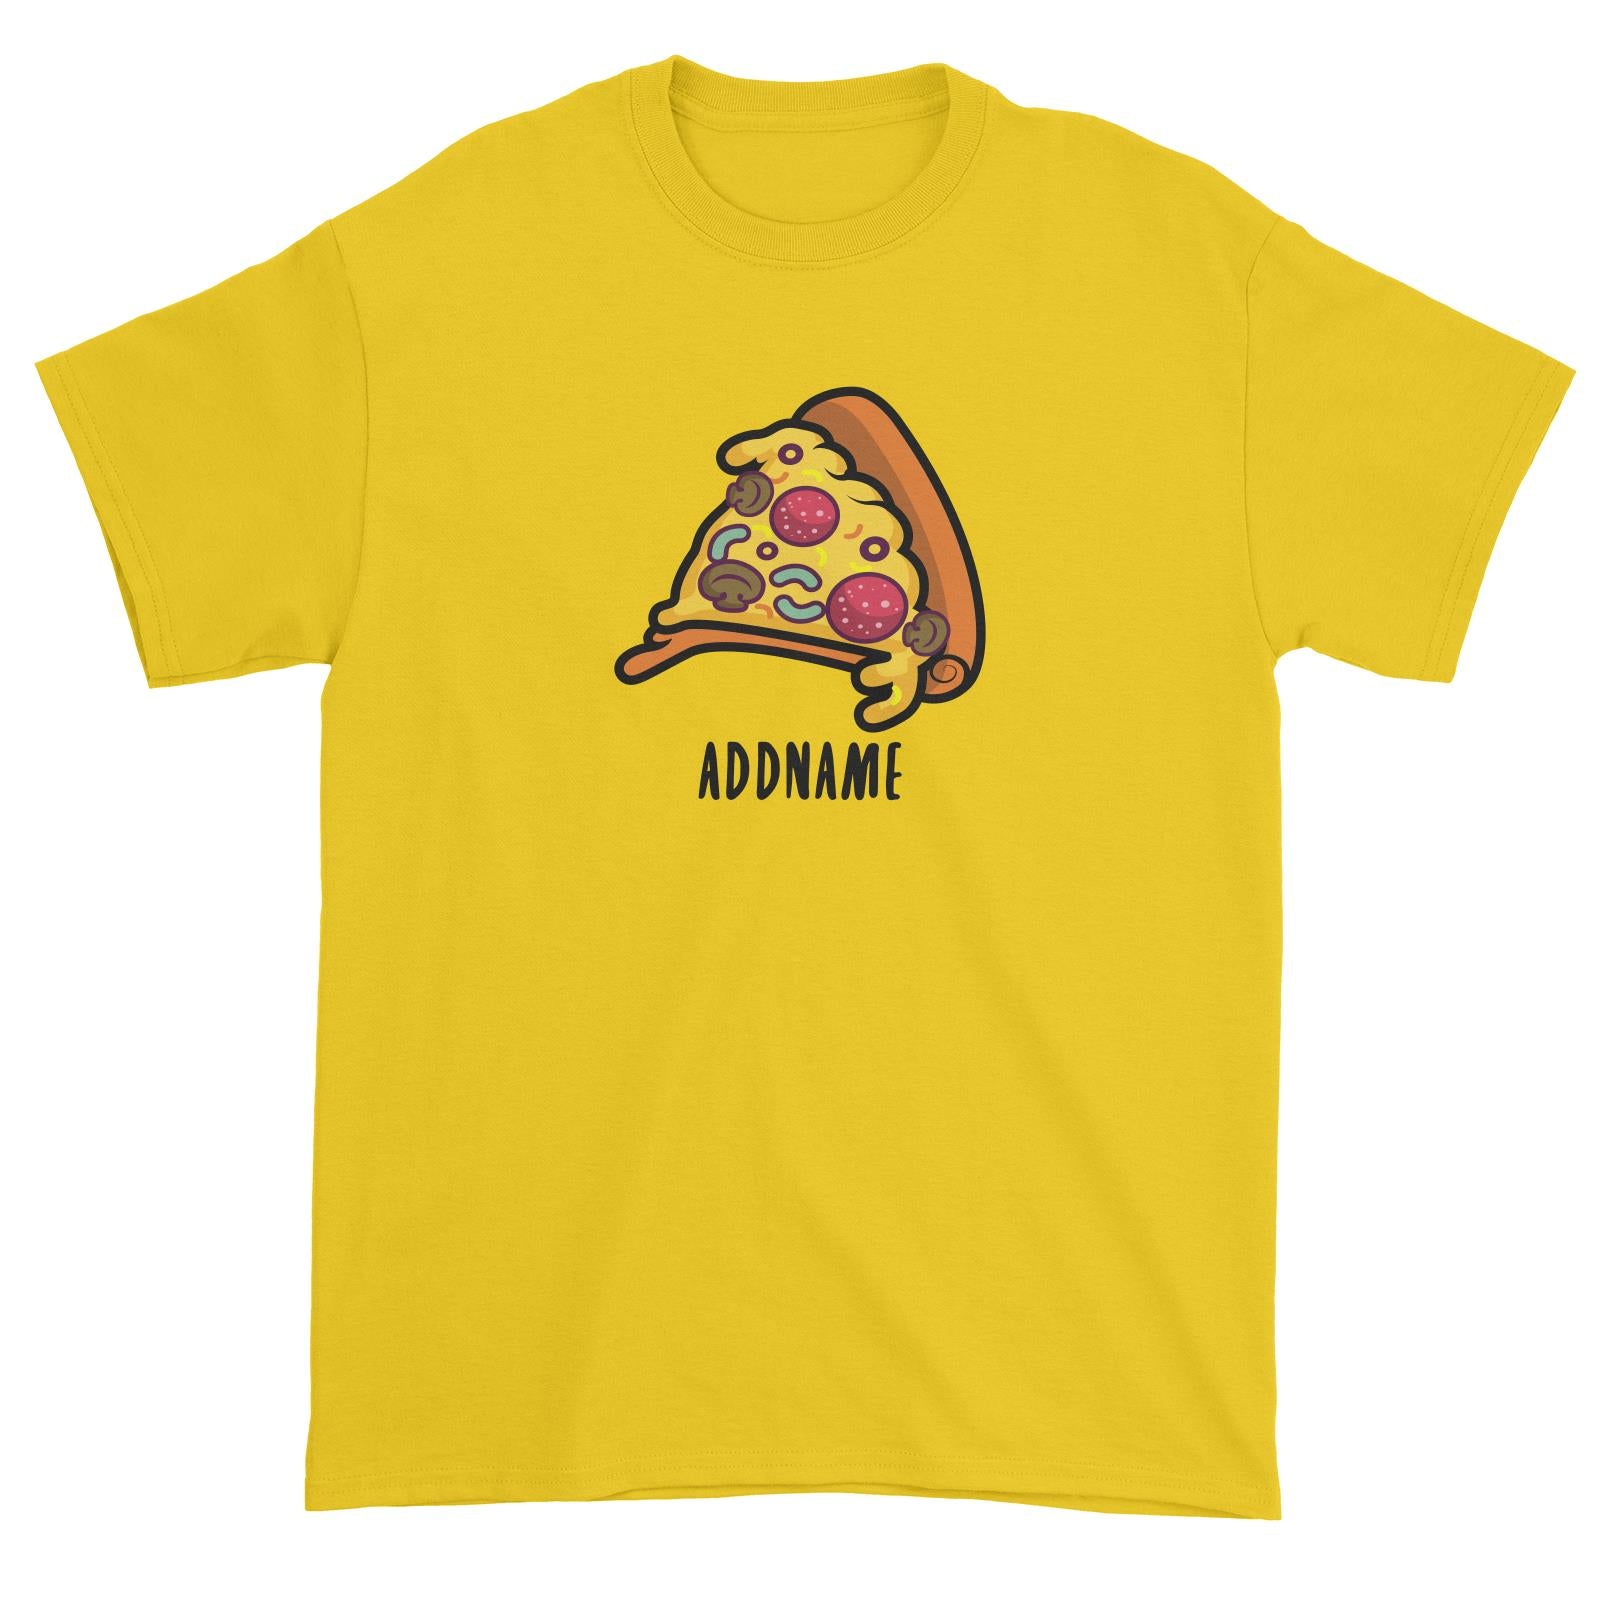 Fast Food Pizza Slice Addname Unisex T-Shirt  Matching Family Comic Cartoon Personalizable Designs